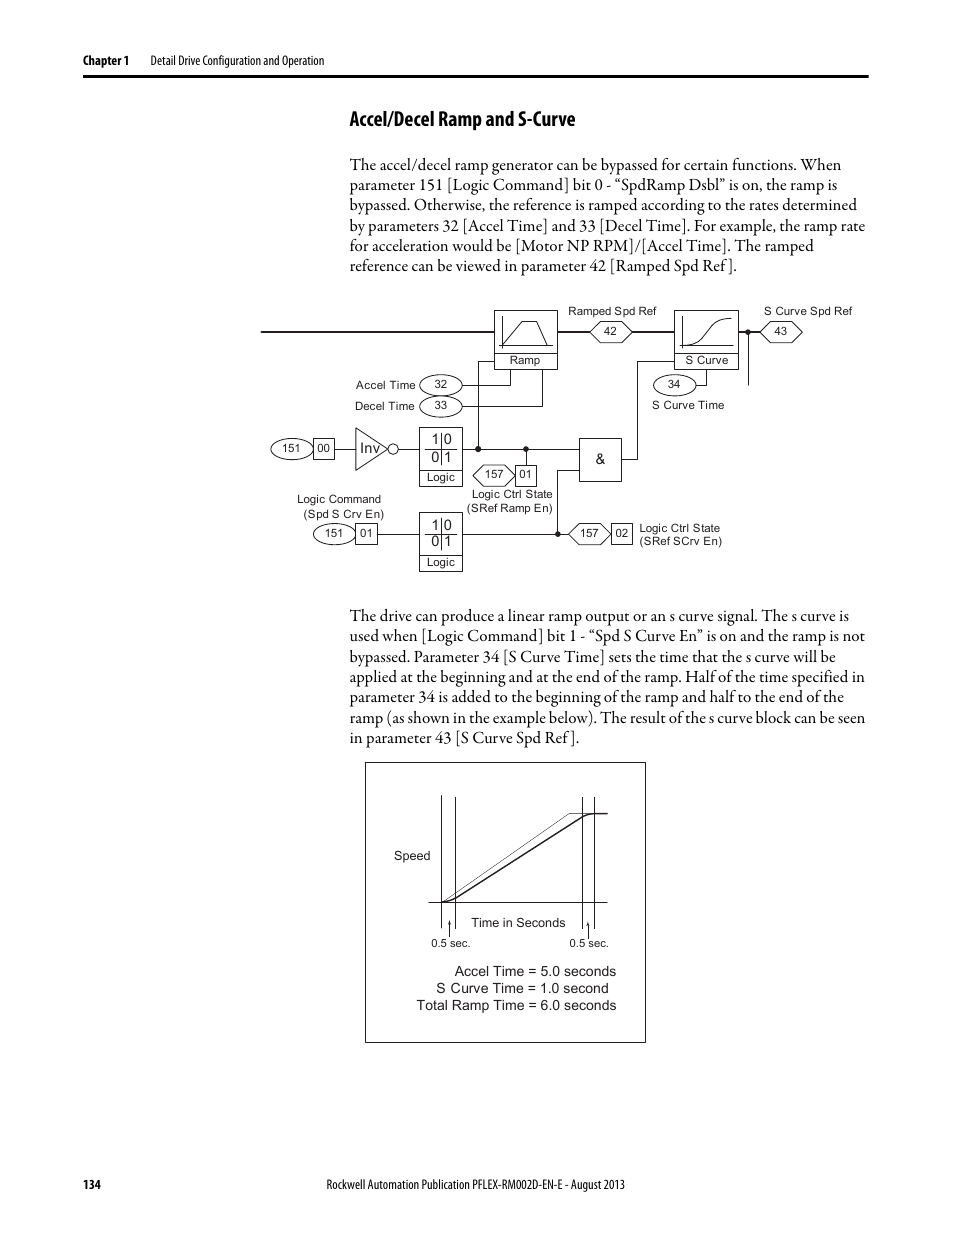 Accel/decel ramp and s-curve | Rockwell Automation 20D PowerFlex 700S with Phase I Control Reference Manual User Manual | Page 134 / 190